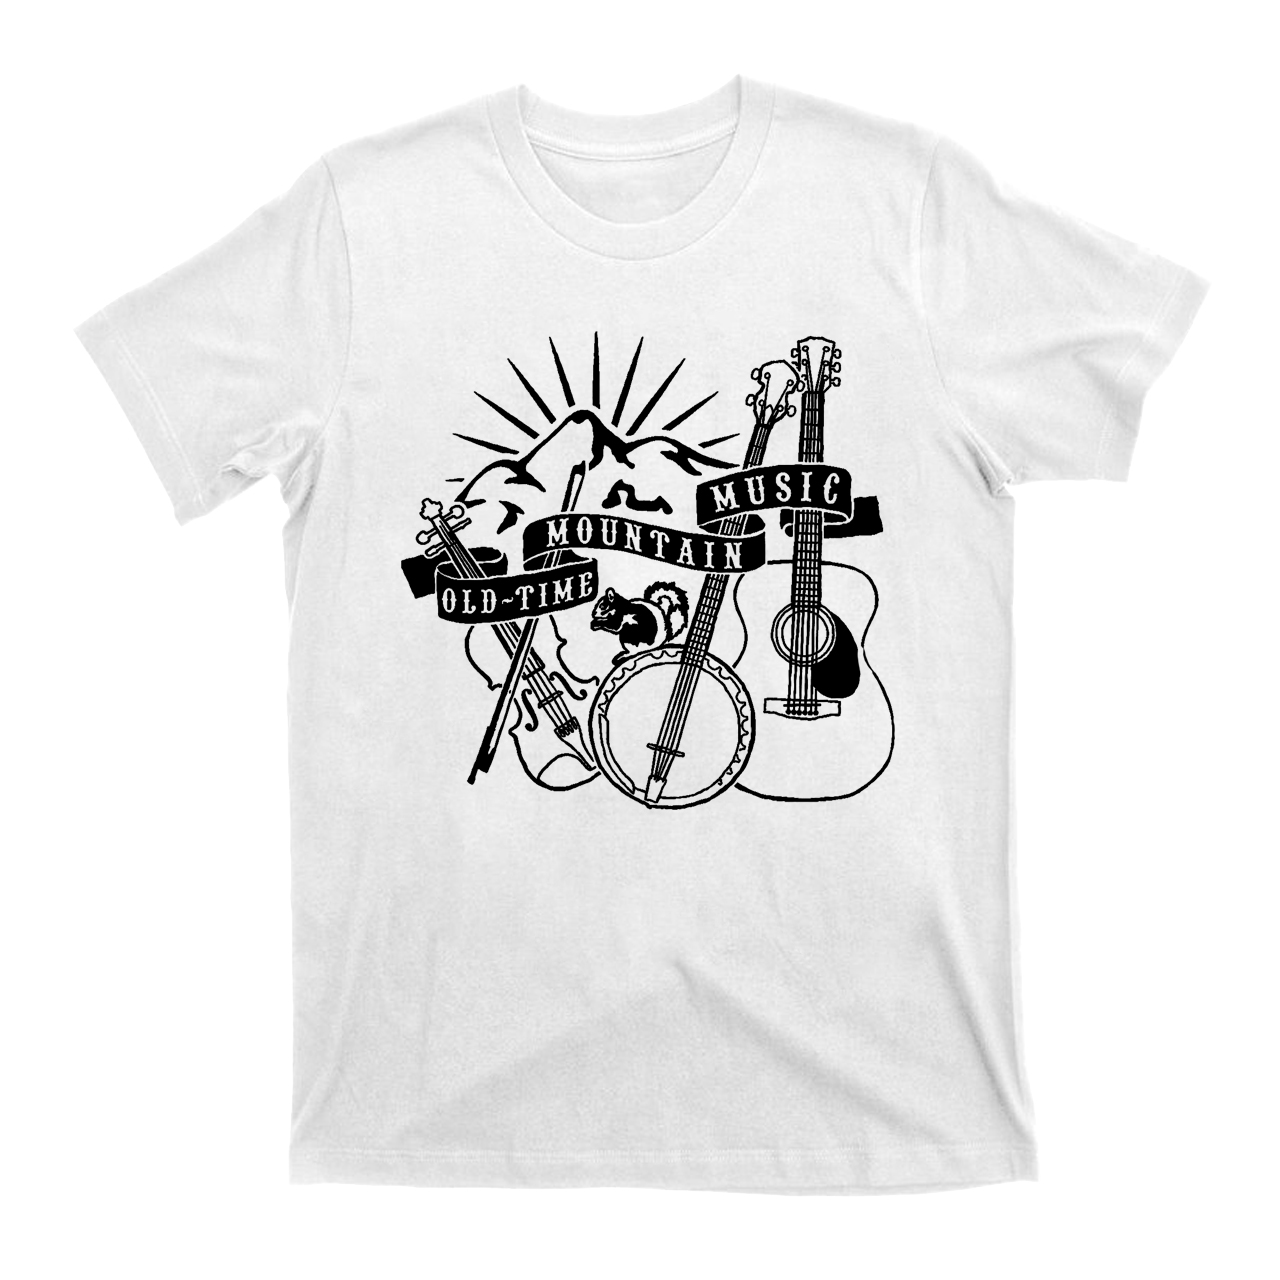 Old Time Mountain Music Classic T-shirt